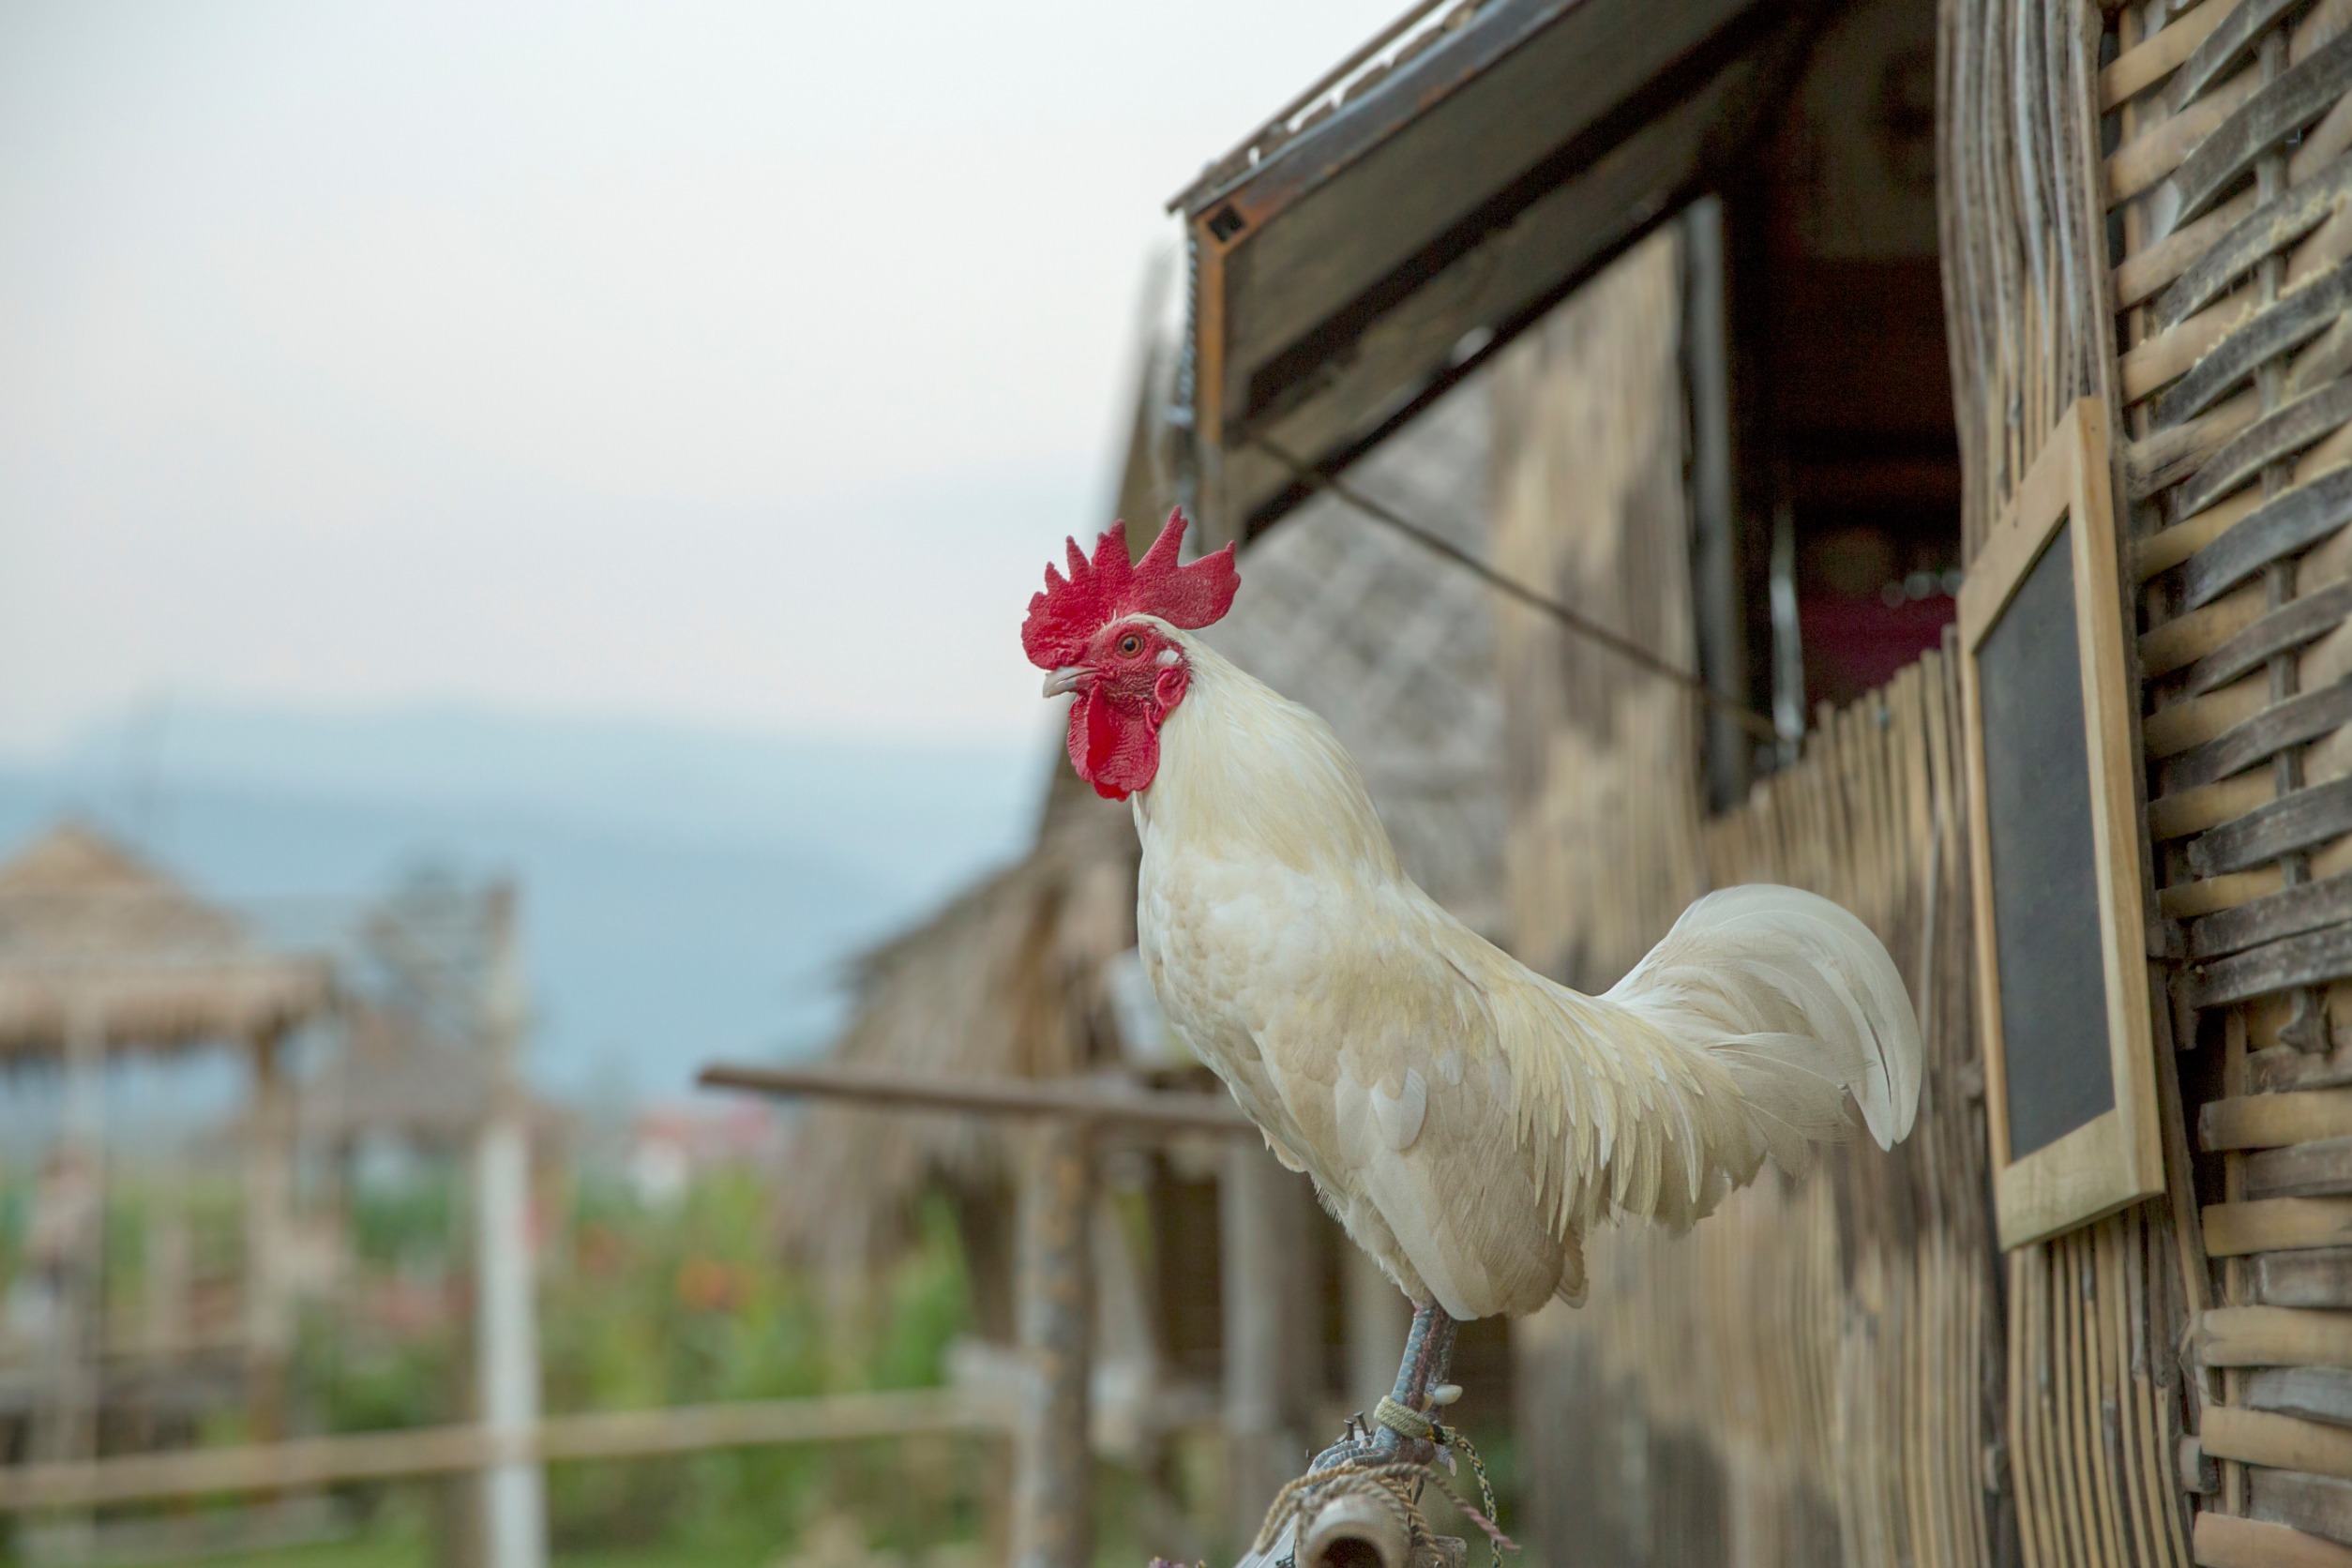 A chicken standing outside a chicken coop.